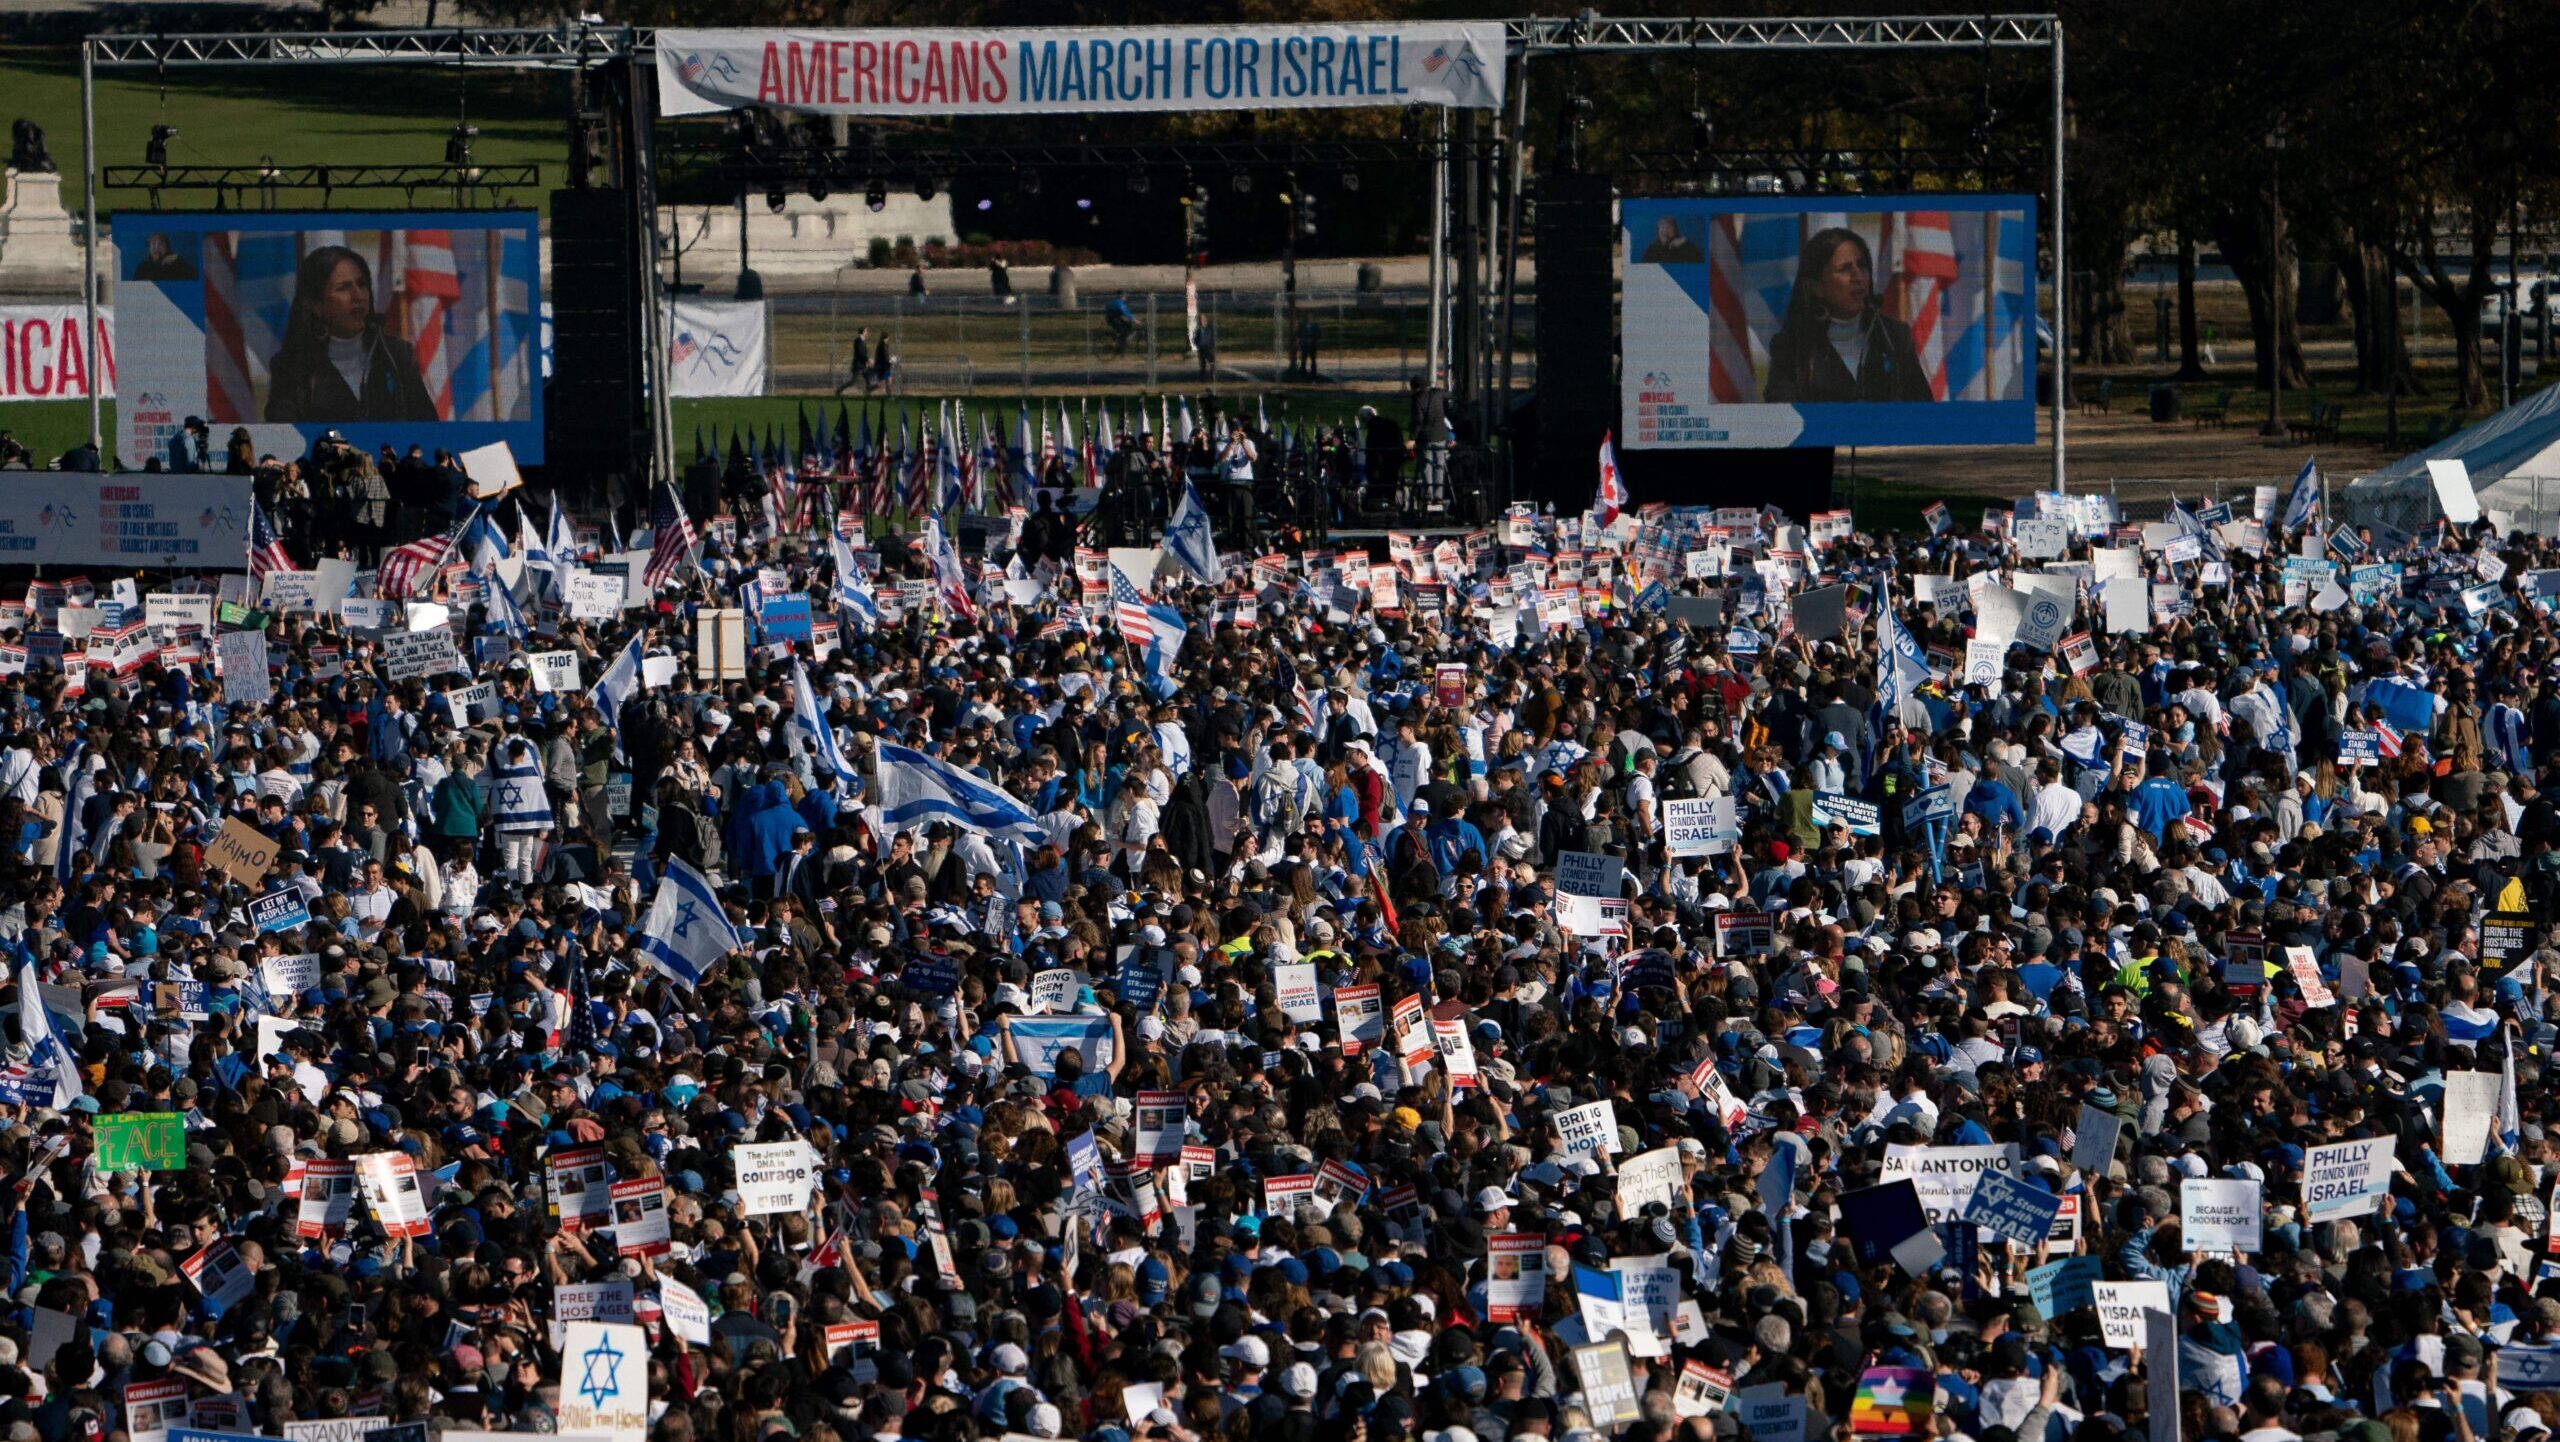 Nearly 300,000 Israel Supporters Rallied in DC; 900 Stuck as Bus Drivers Refuse To Serve Jews